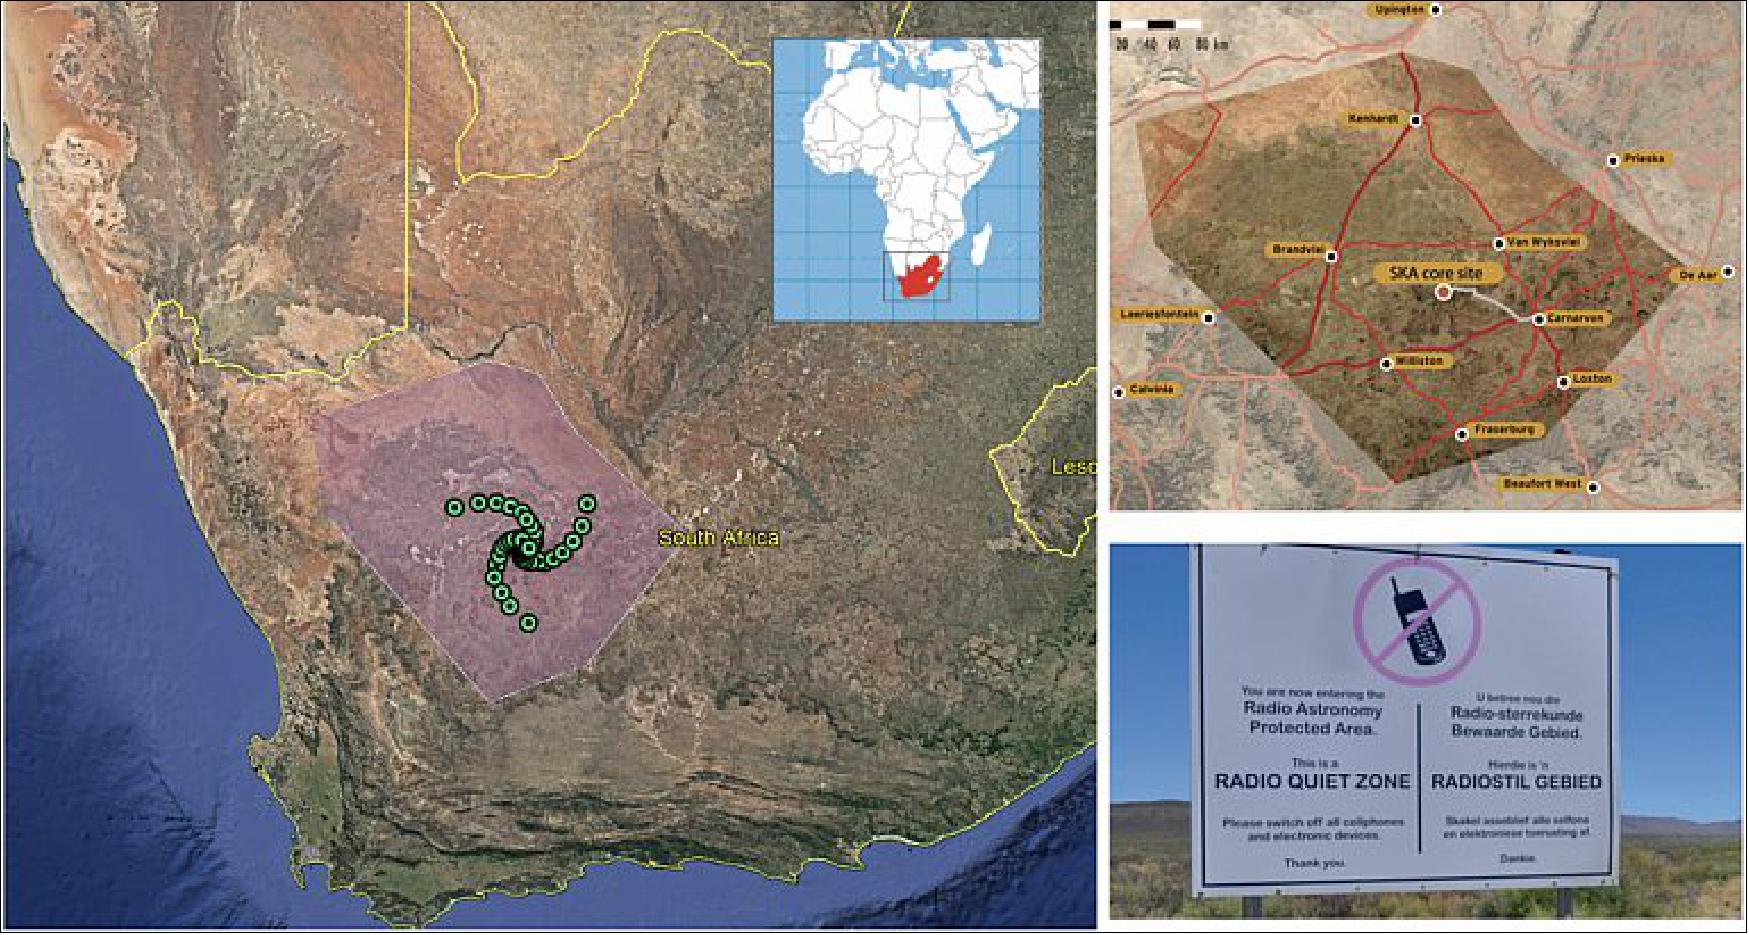 Figure 16: The Karoo Astronomy Advantage Area (KAAA) was established as part of the Astronomy Geographic Advantage Act 2007. Consisting of a polygonal area of ~500 km x 300 km at extents, this Radio Quiet Zone provides radio protection to the South African site of the SKA-Mid telescope (image credit: SKAO)